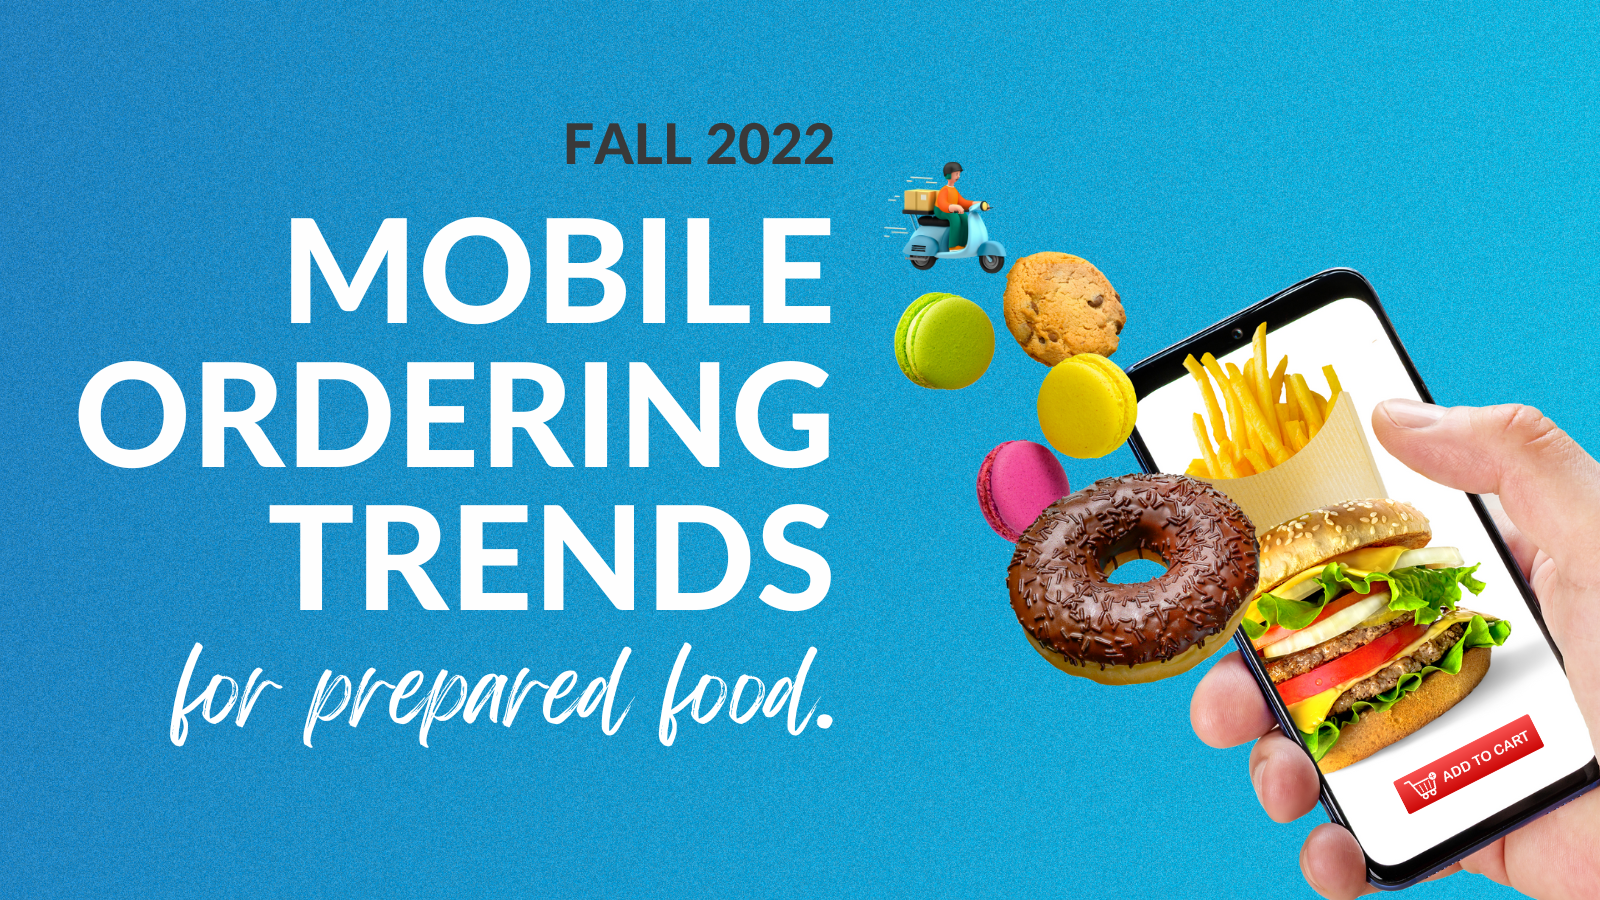 Fall 2022 Mobile Ordering Trends